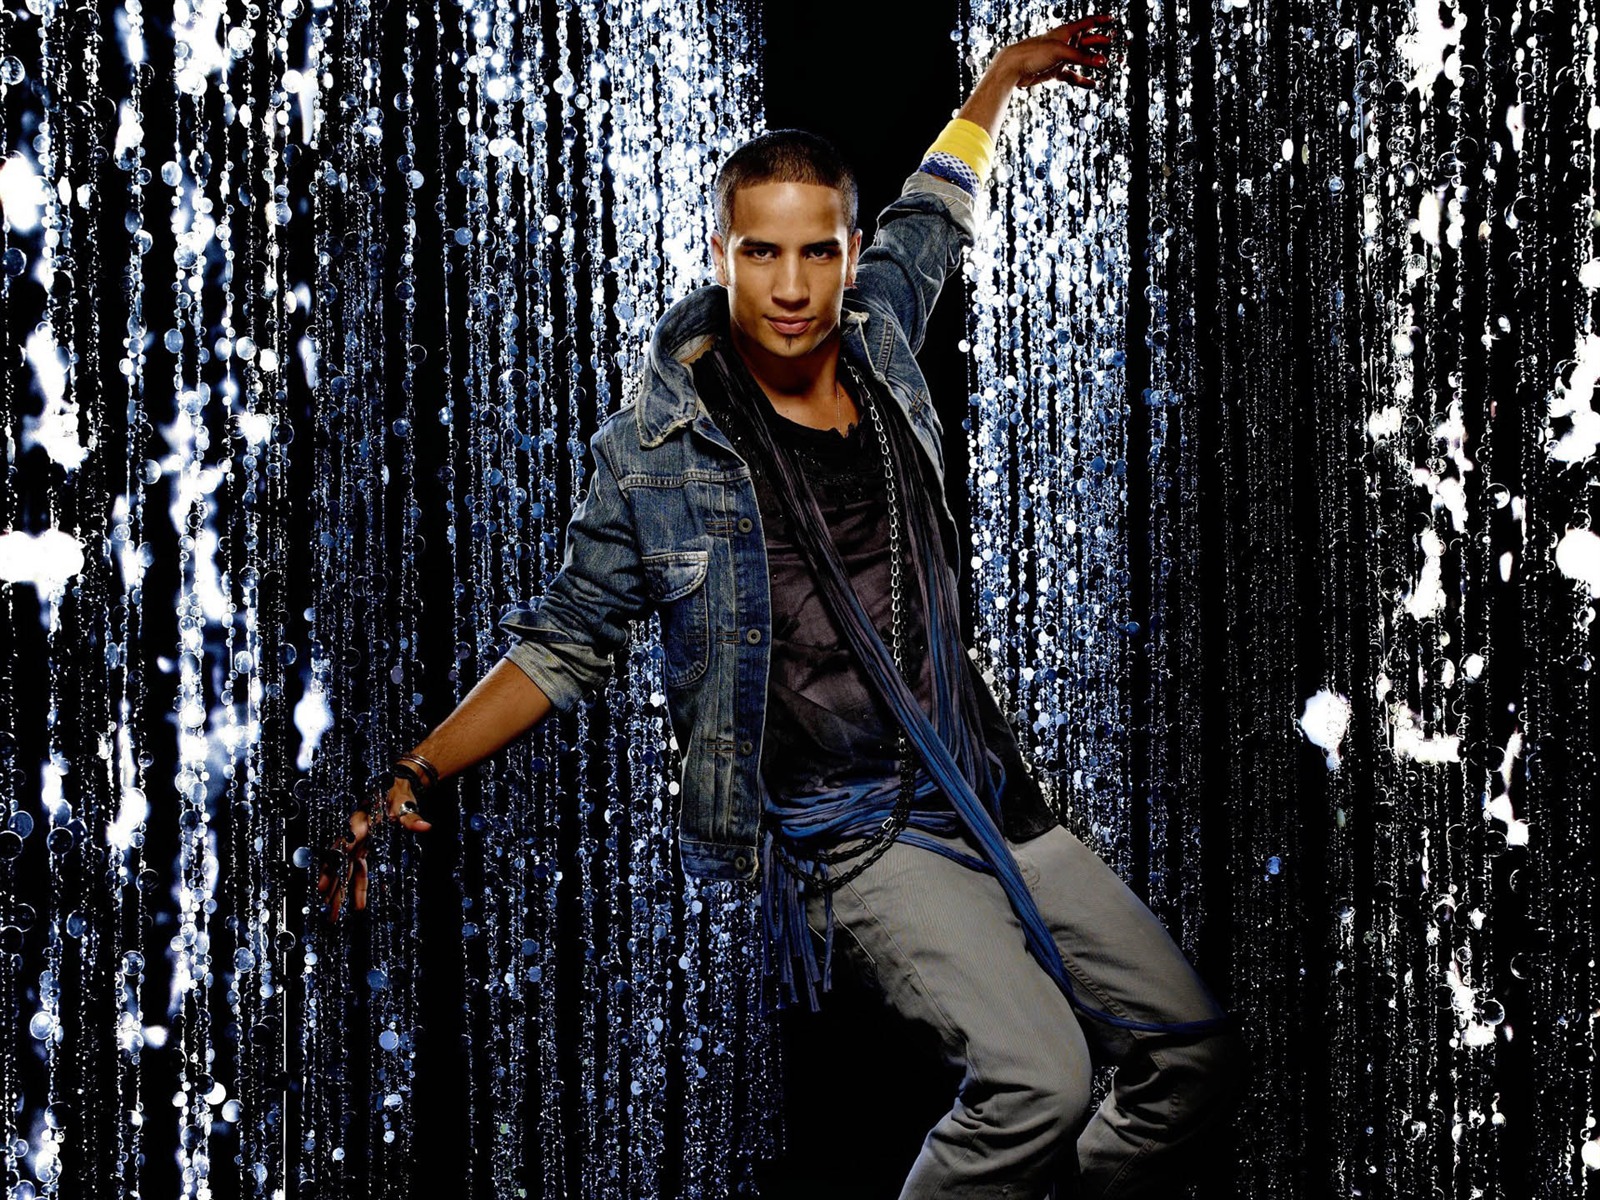 So You Think You Can Dance Wallpaper (3) #14 - 1600x1200